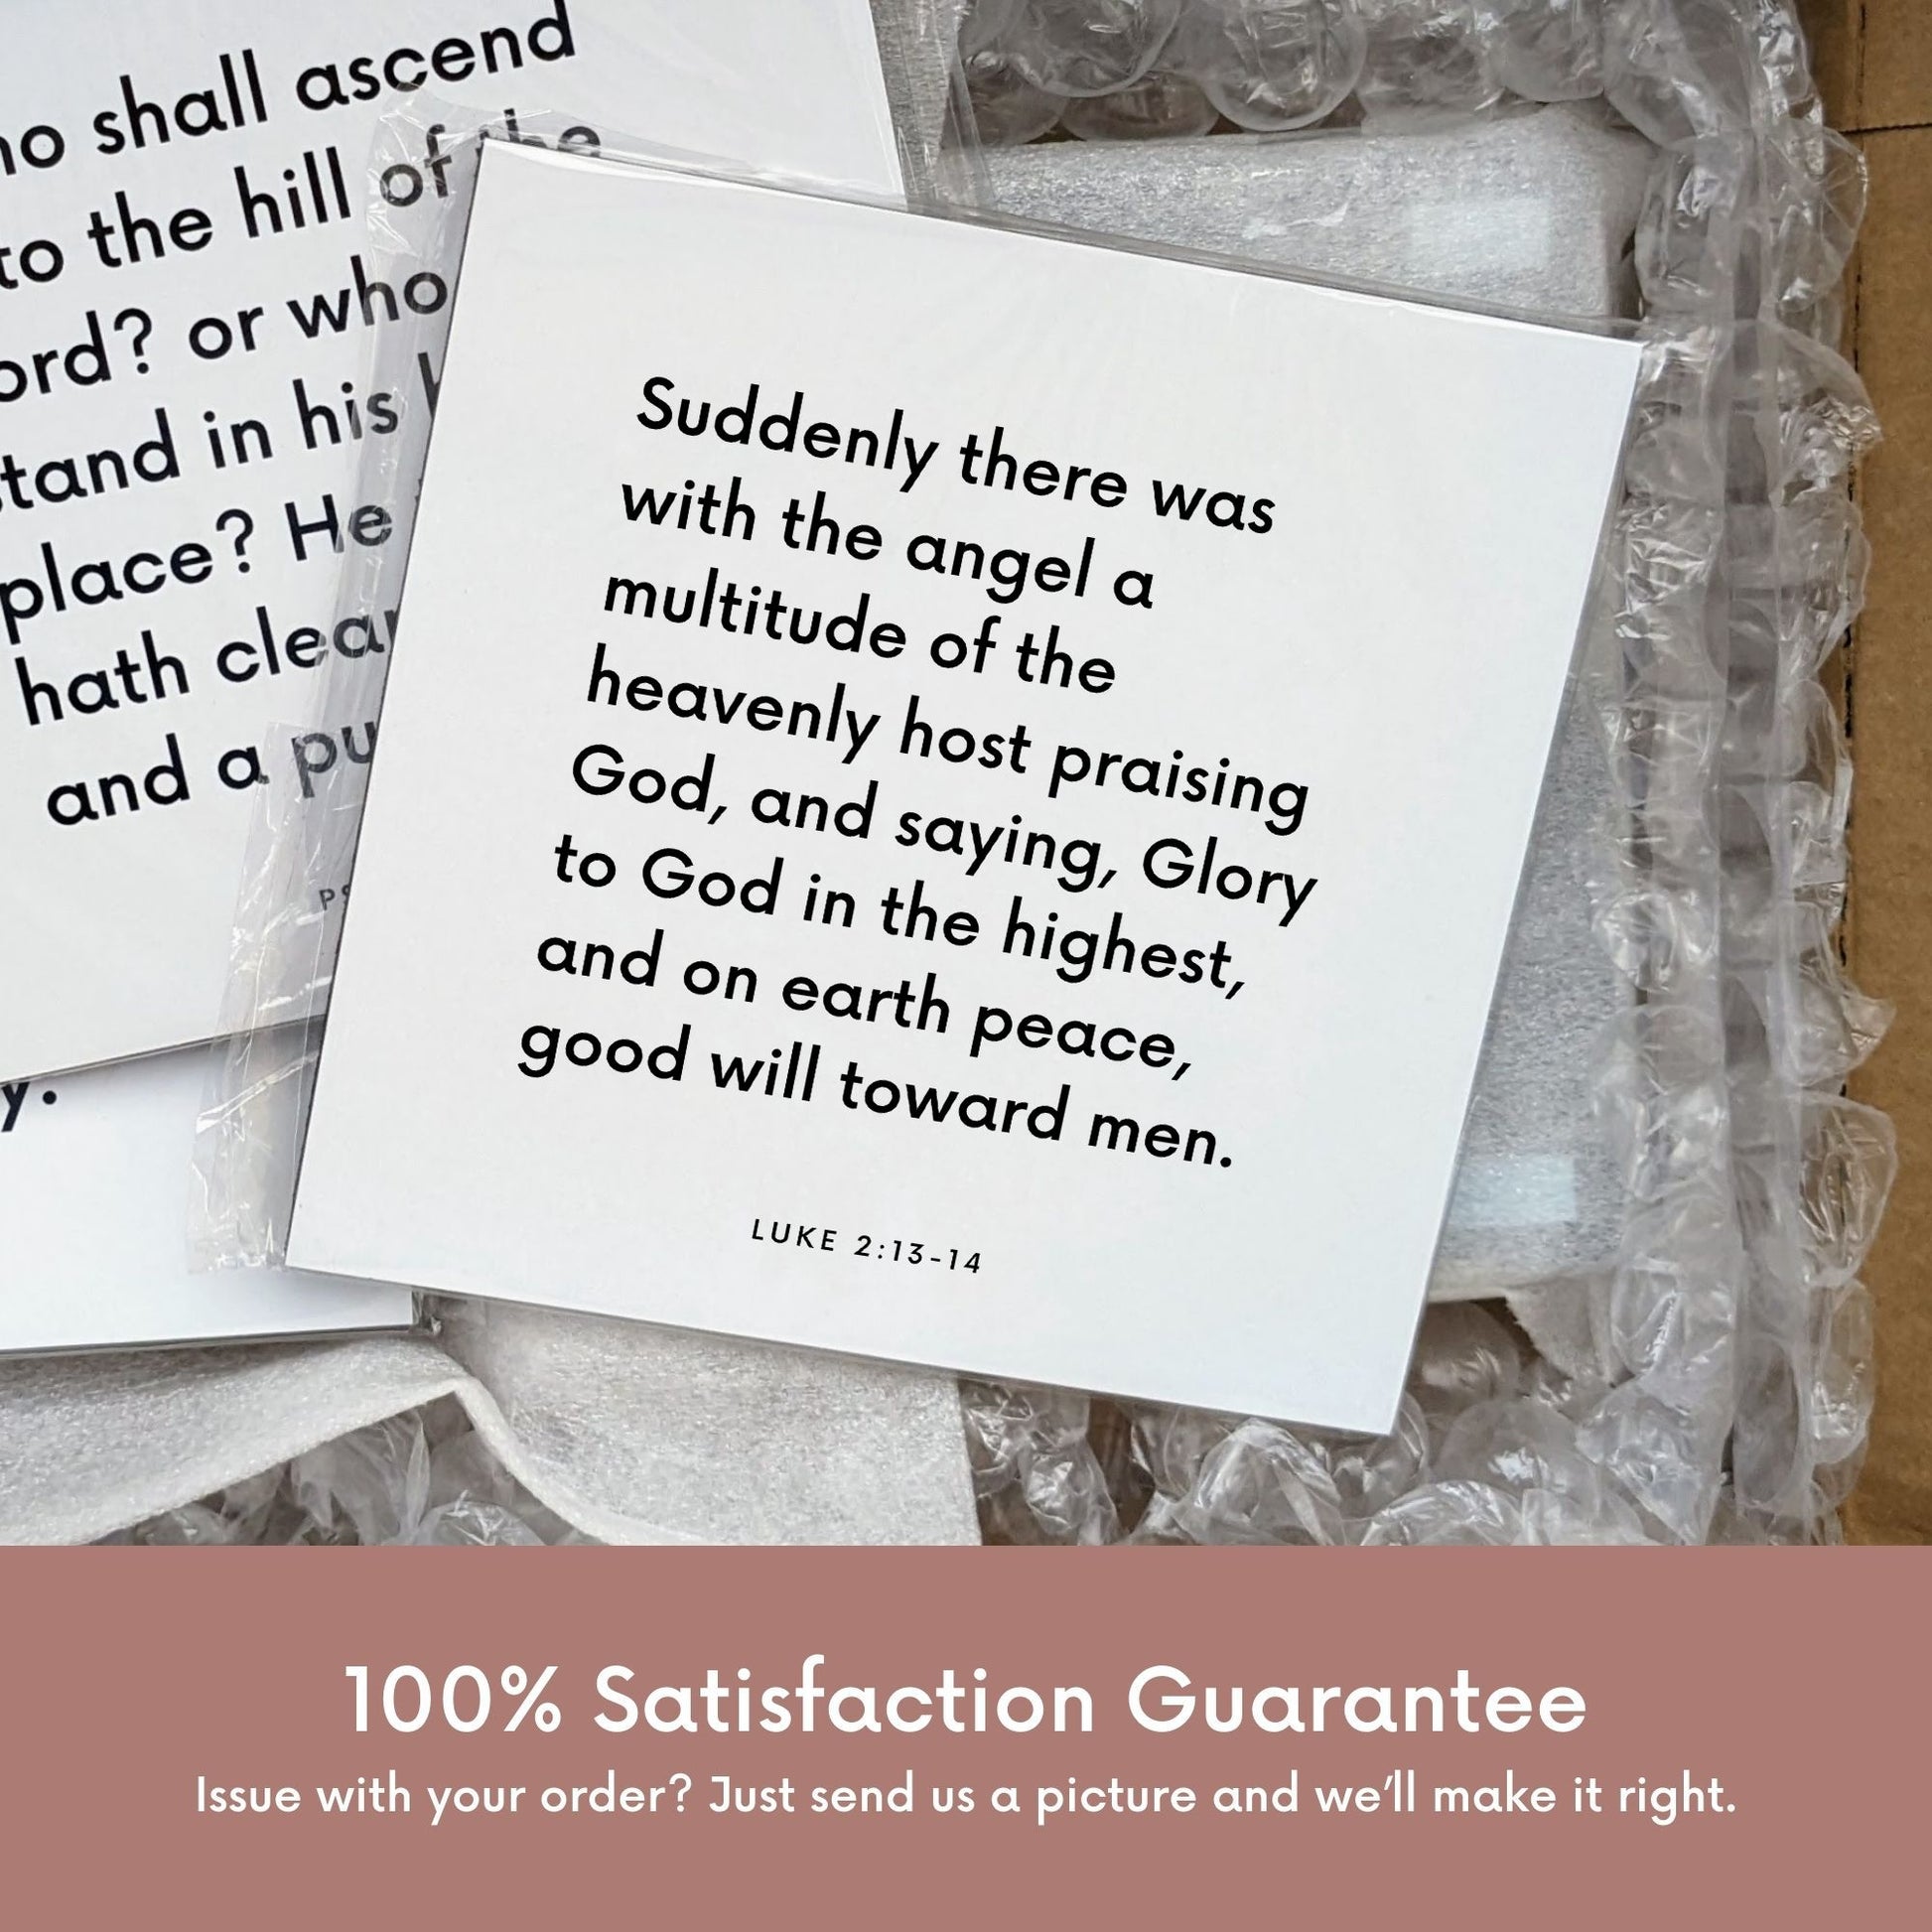 Shipping materials for scripture tile of Luke 2:13-14 - "Glory to God in the highest, and on earth peace, good will"